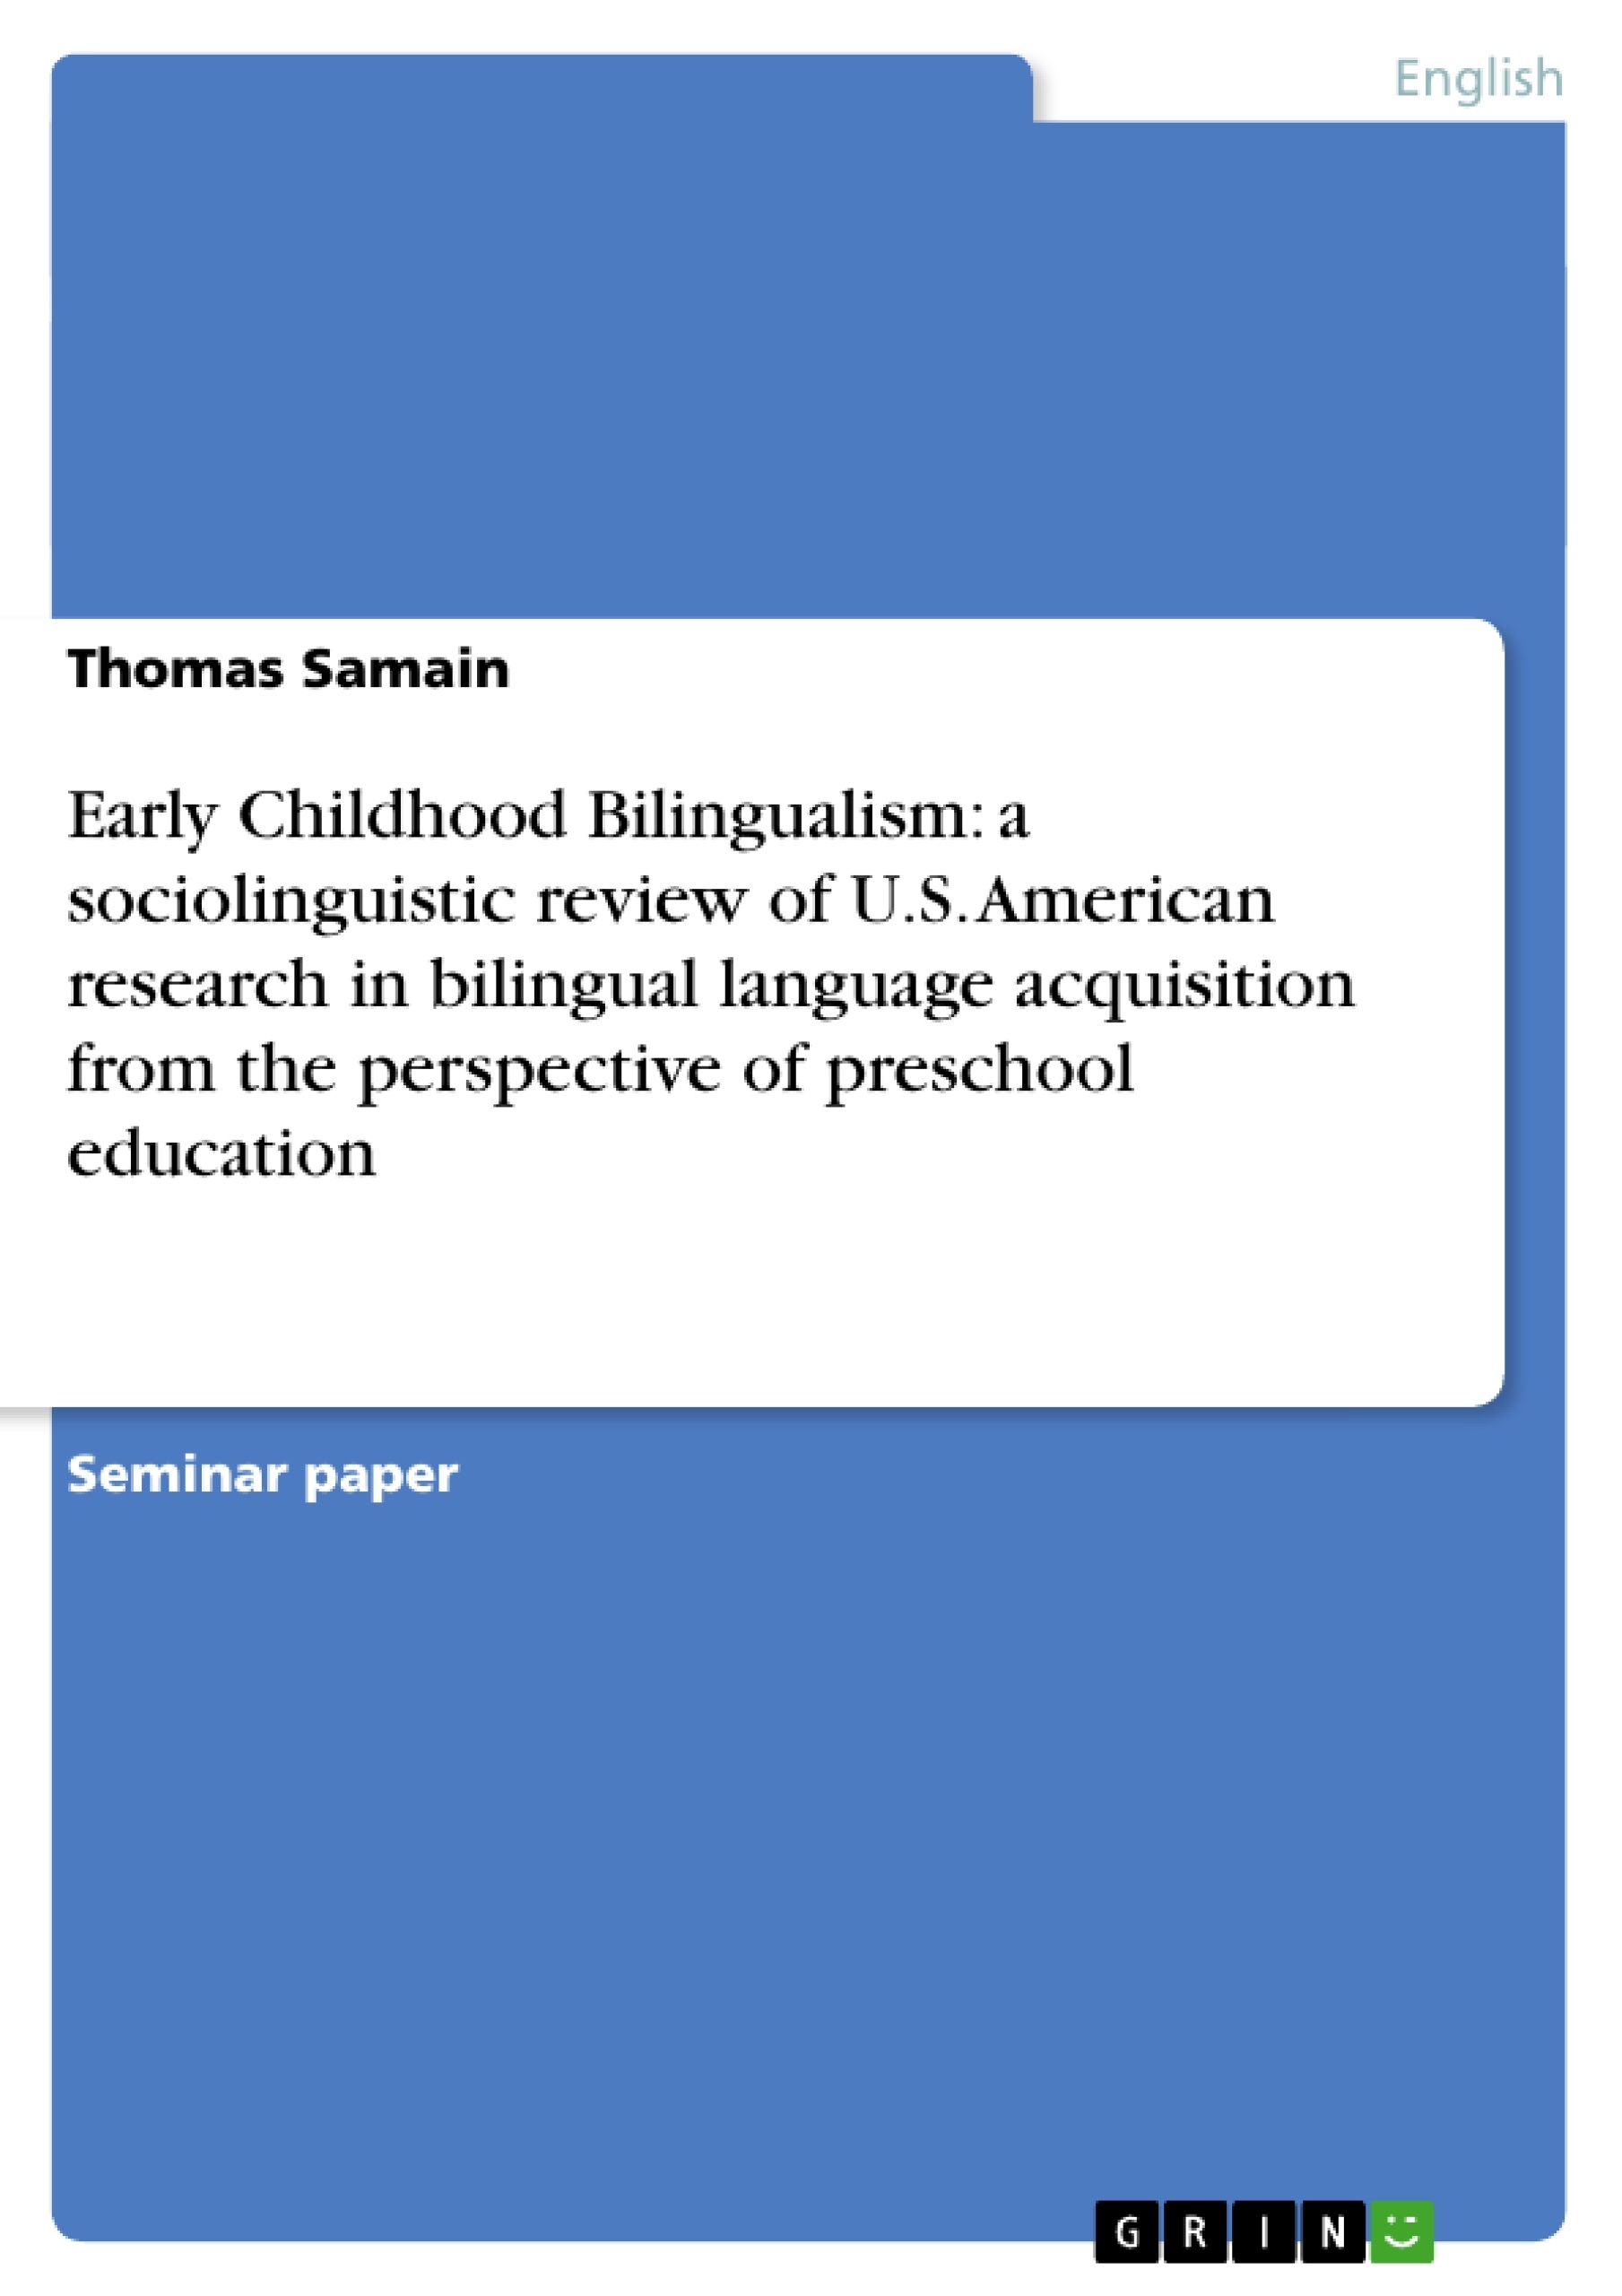 Title: Early Childhood Bilingualism: a sociolinguistic review of U.S. American research in bilingual language acquisition from the perspective of preschool education